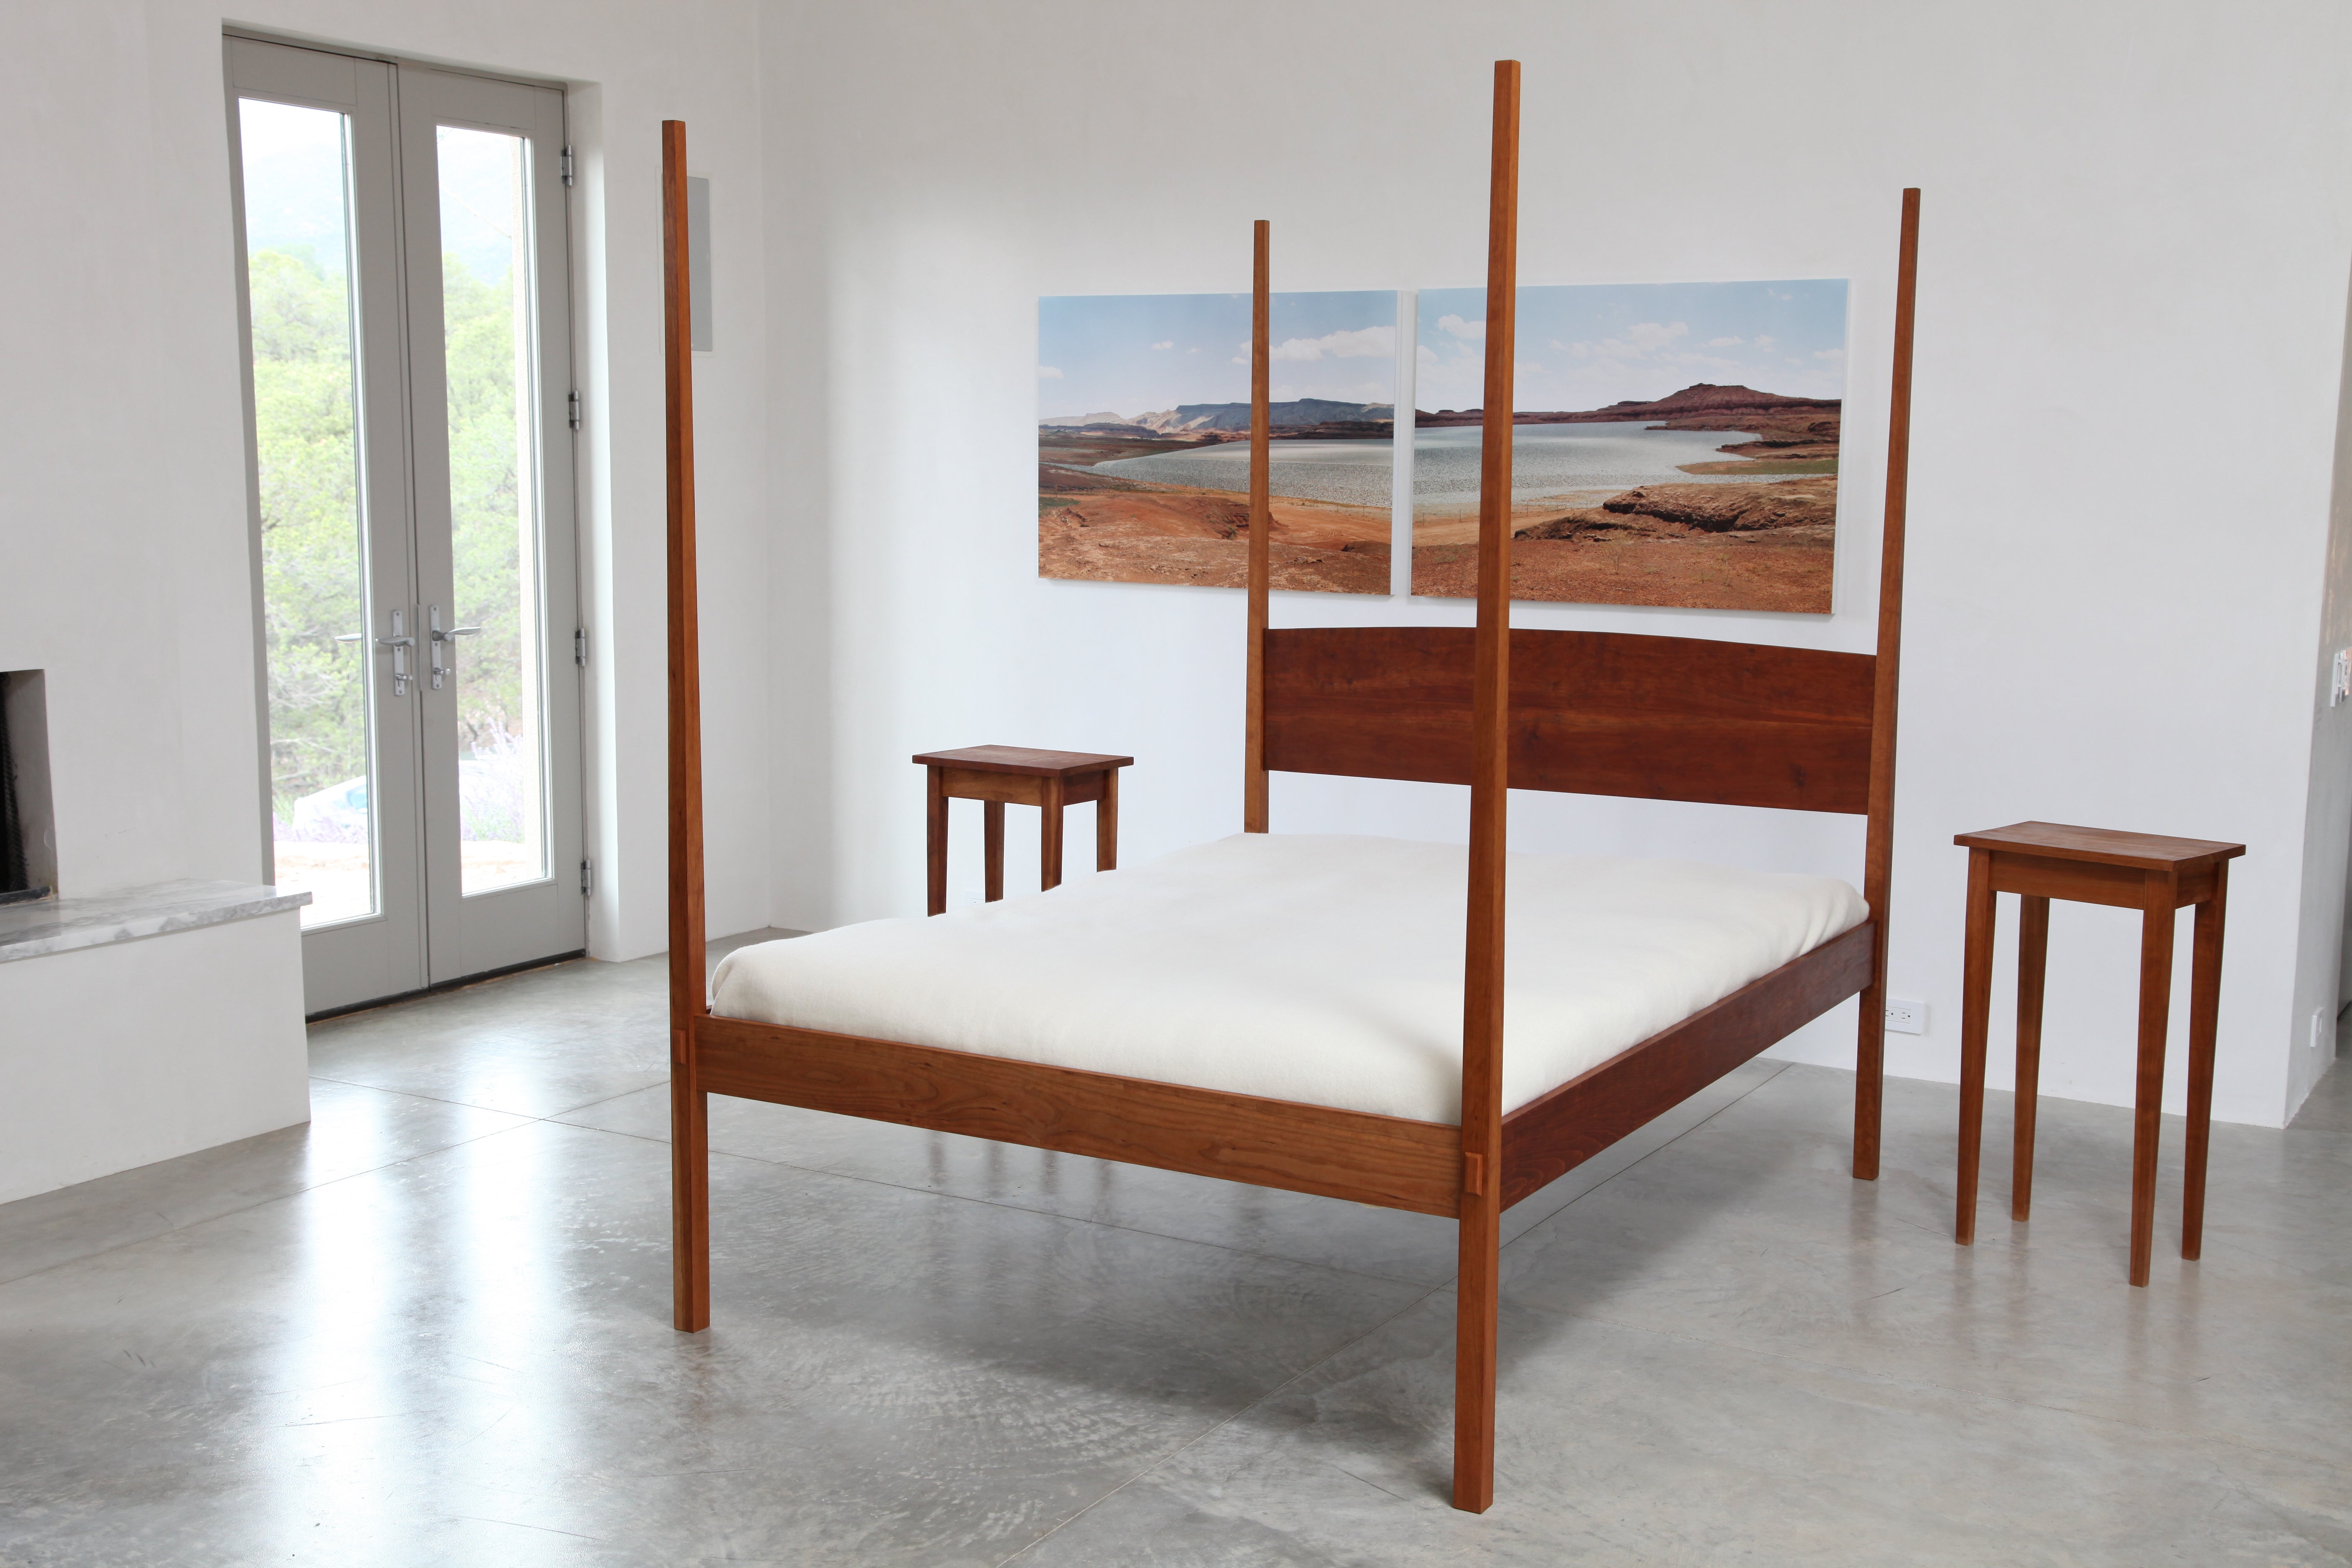 This four poster contemporary pencil post bed was one of the original pieces that we made in our studio. Boyd & Allister got its start over 12 years ago making a line of beds for a local organic mattress shop. This design uses traditional joinery